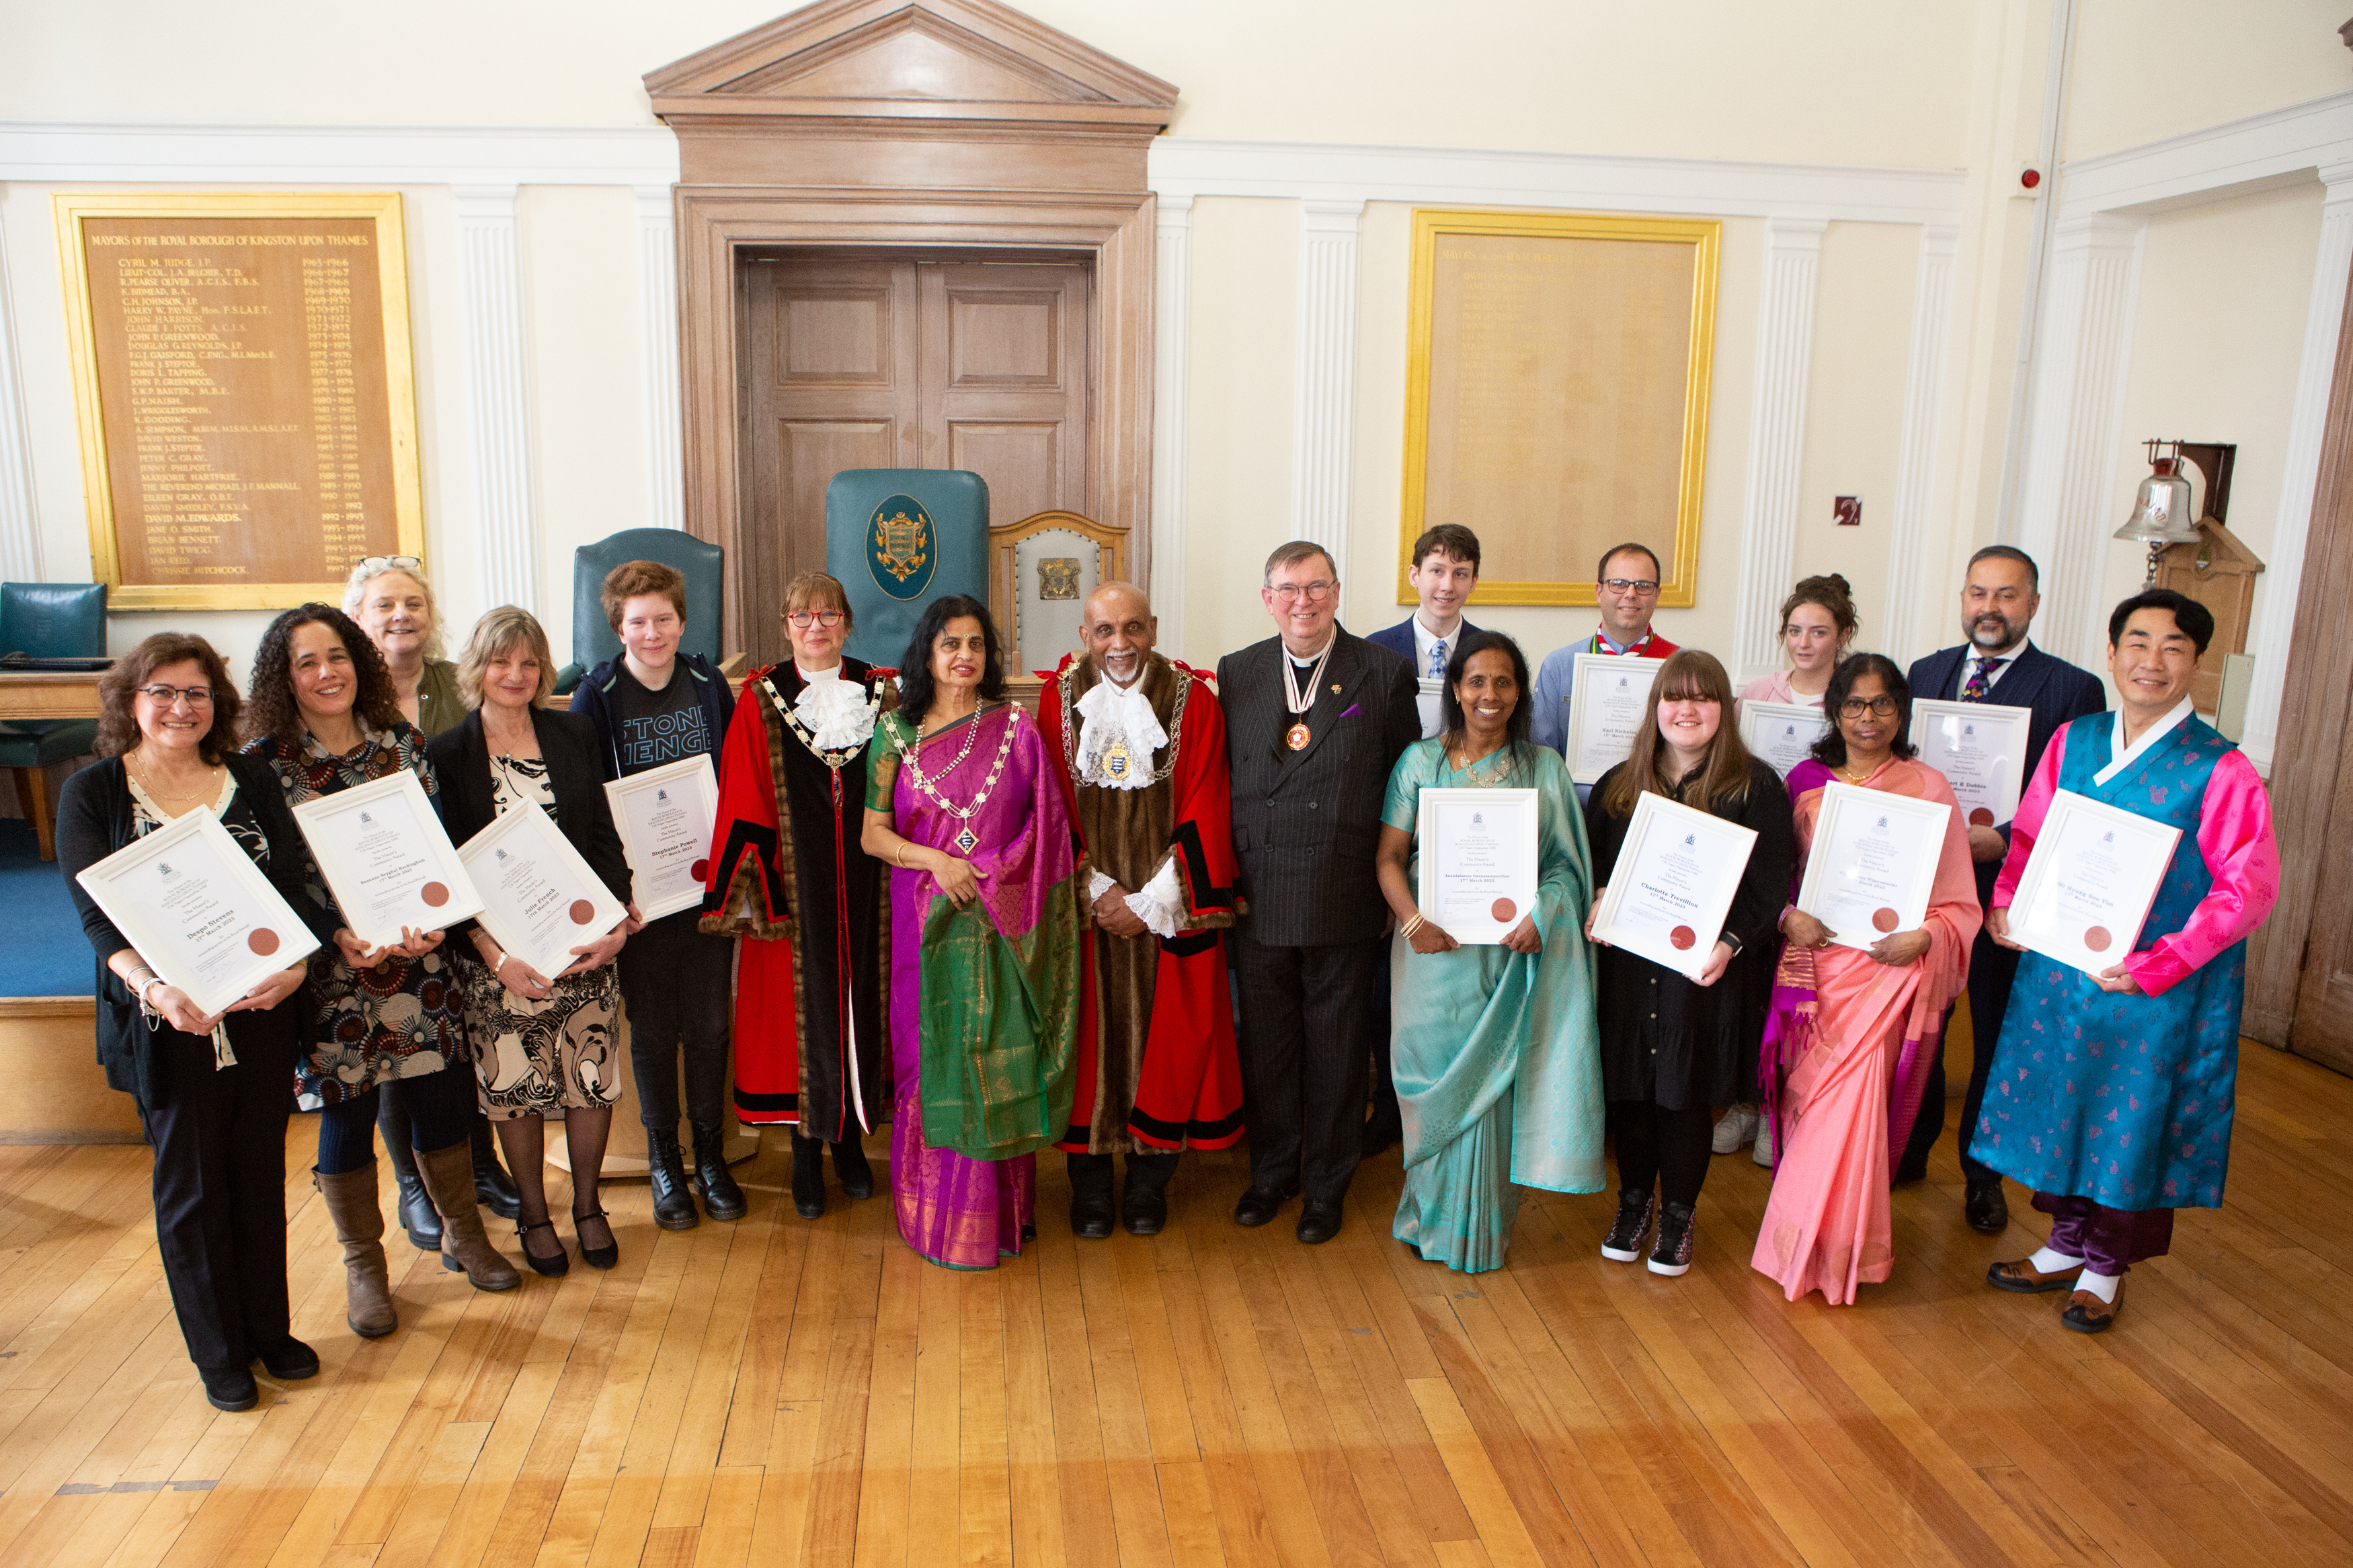 A group photo of this year's community award winners with the Mayor